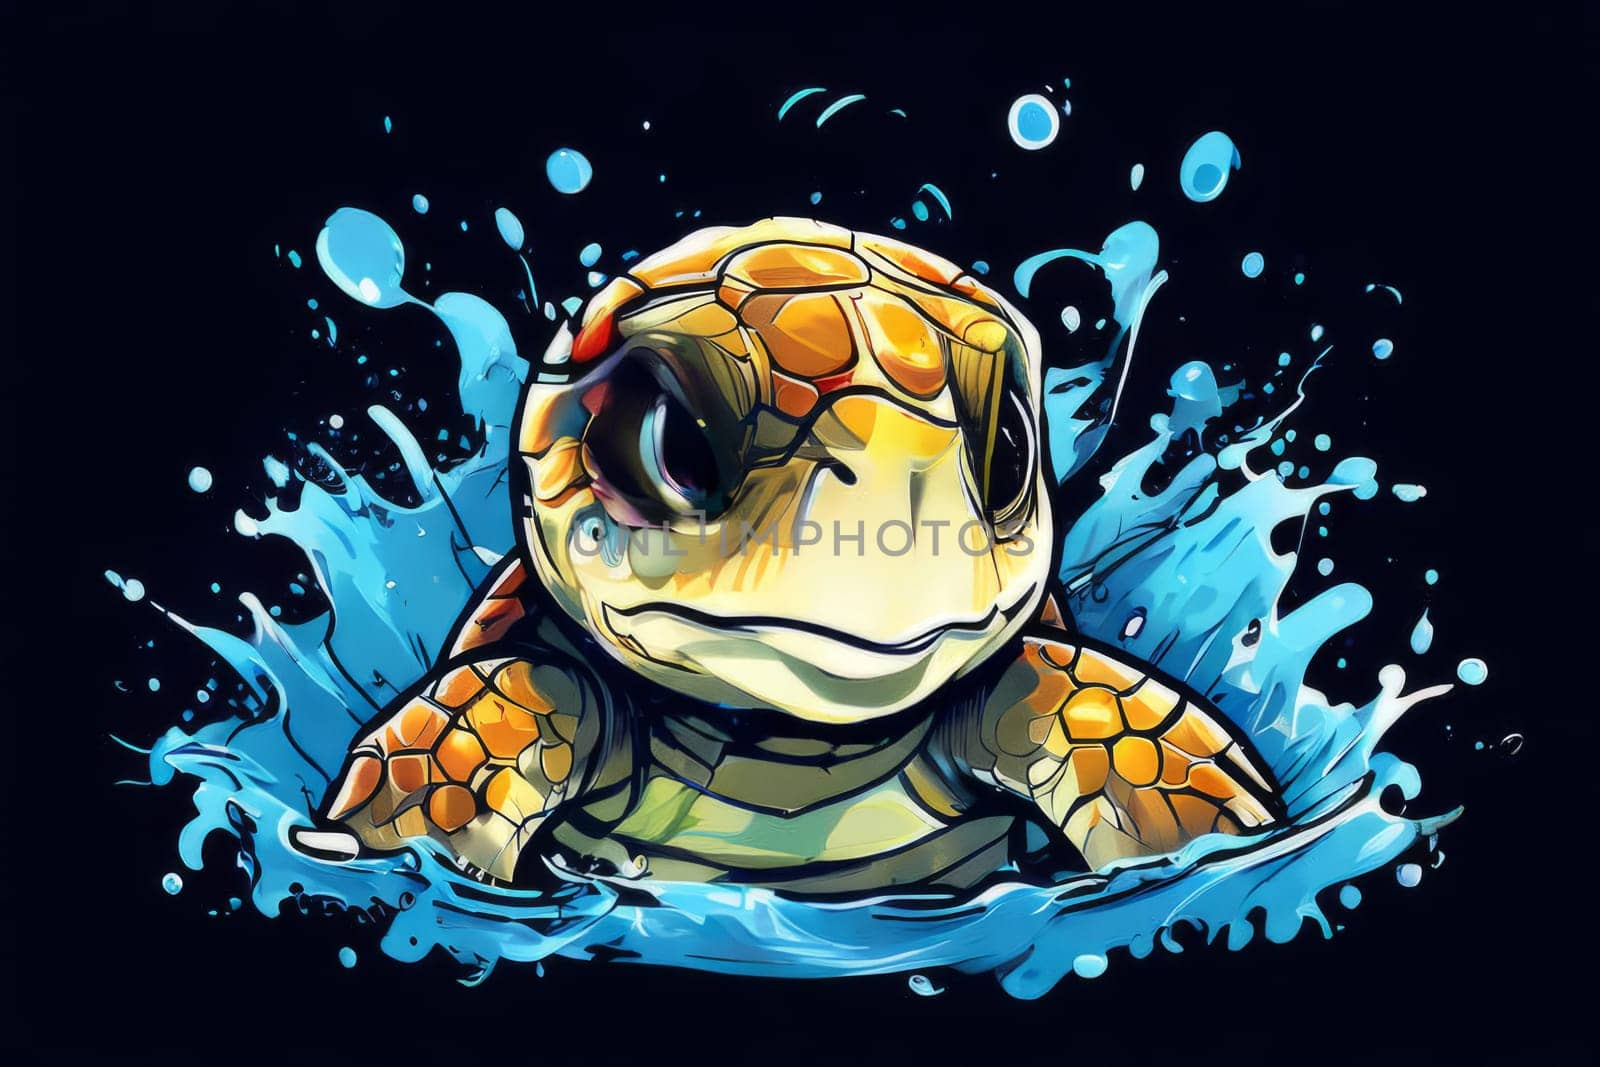 Majestic sea turtle gracefully gliding through crystal clear waters of ocean. For educational materials for kids, game design, animated movies, tourism, stationery, Tshirt design, clothing design. by Angelsmoon